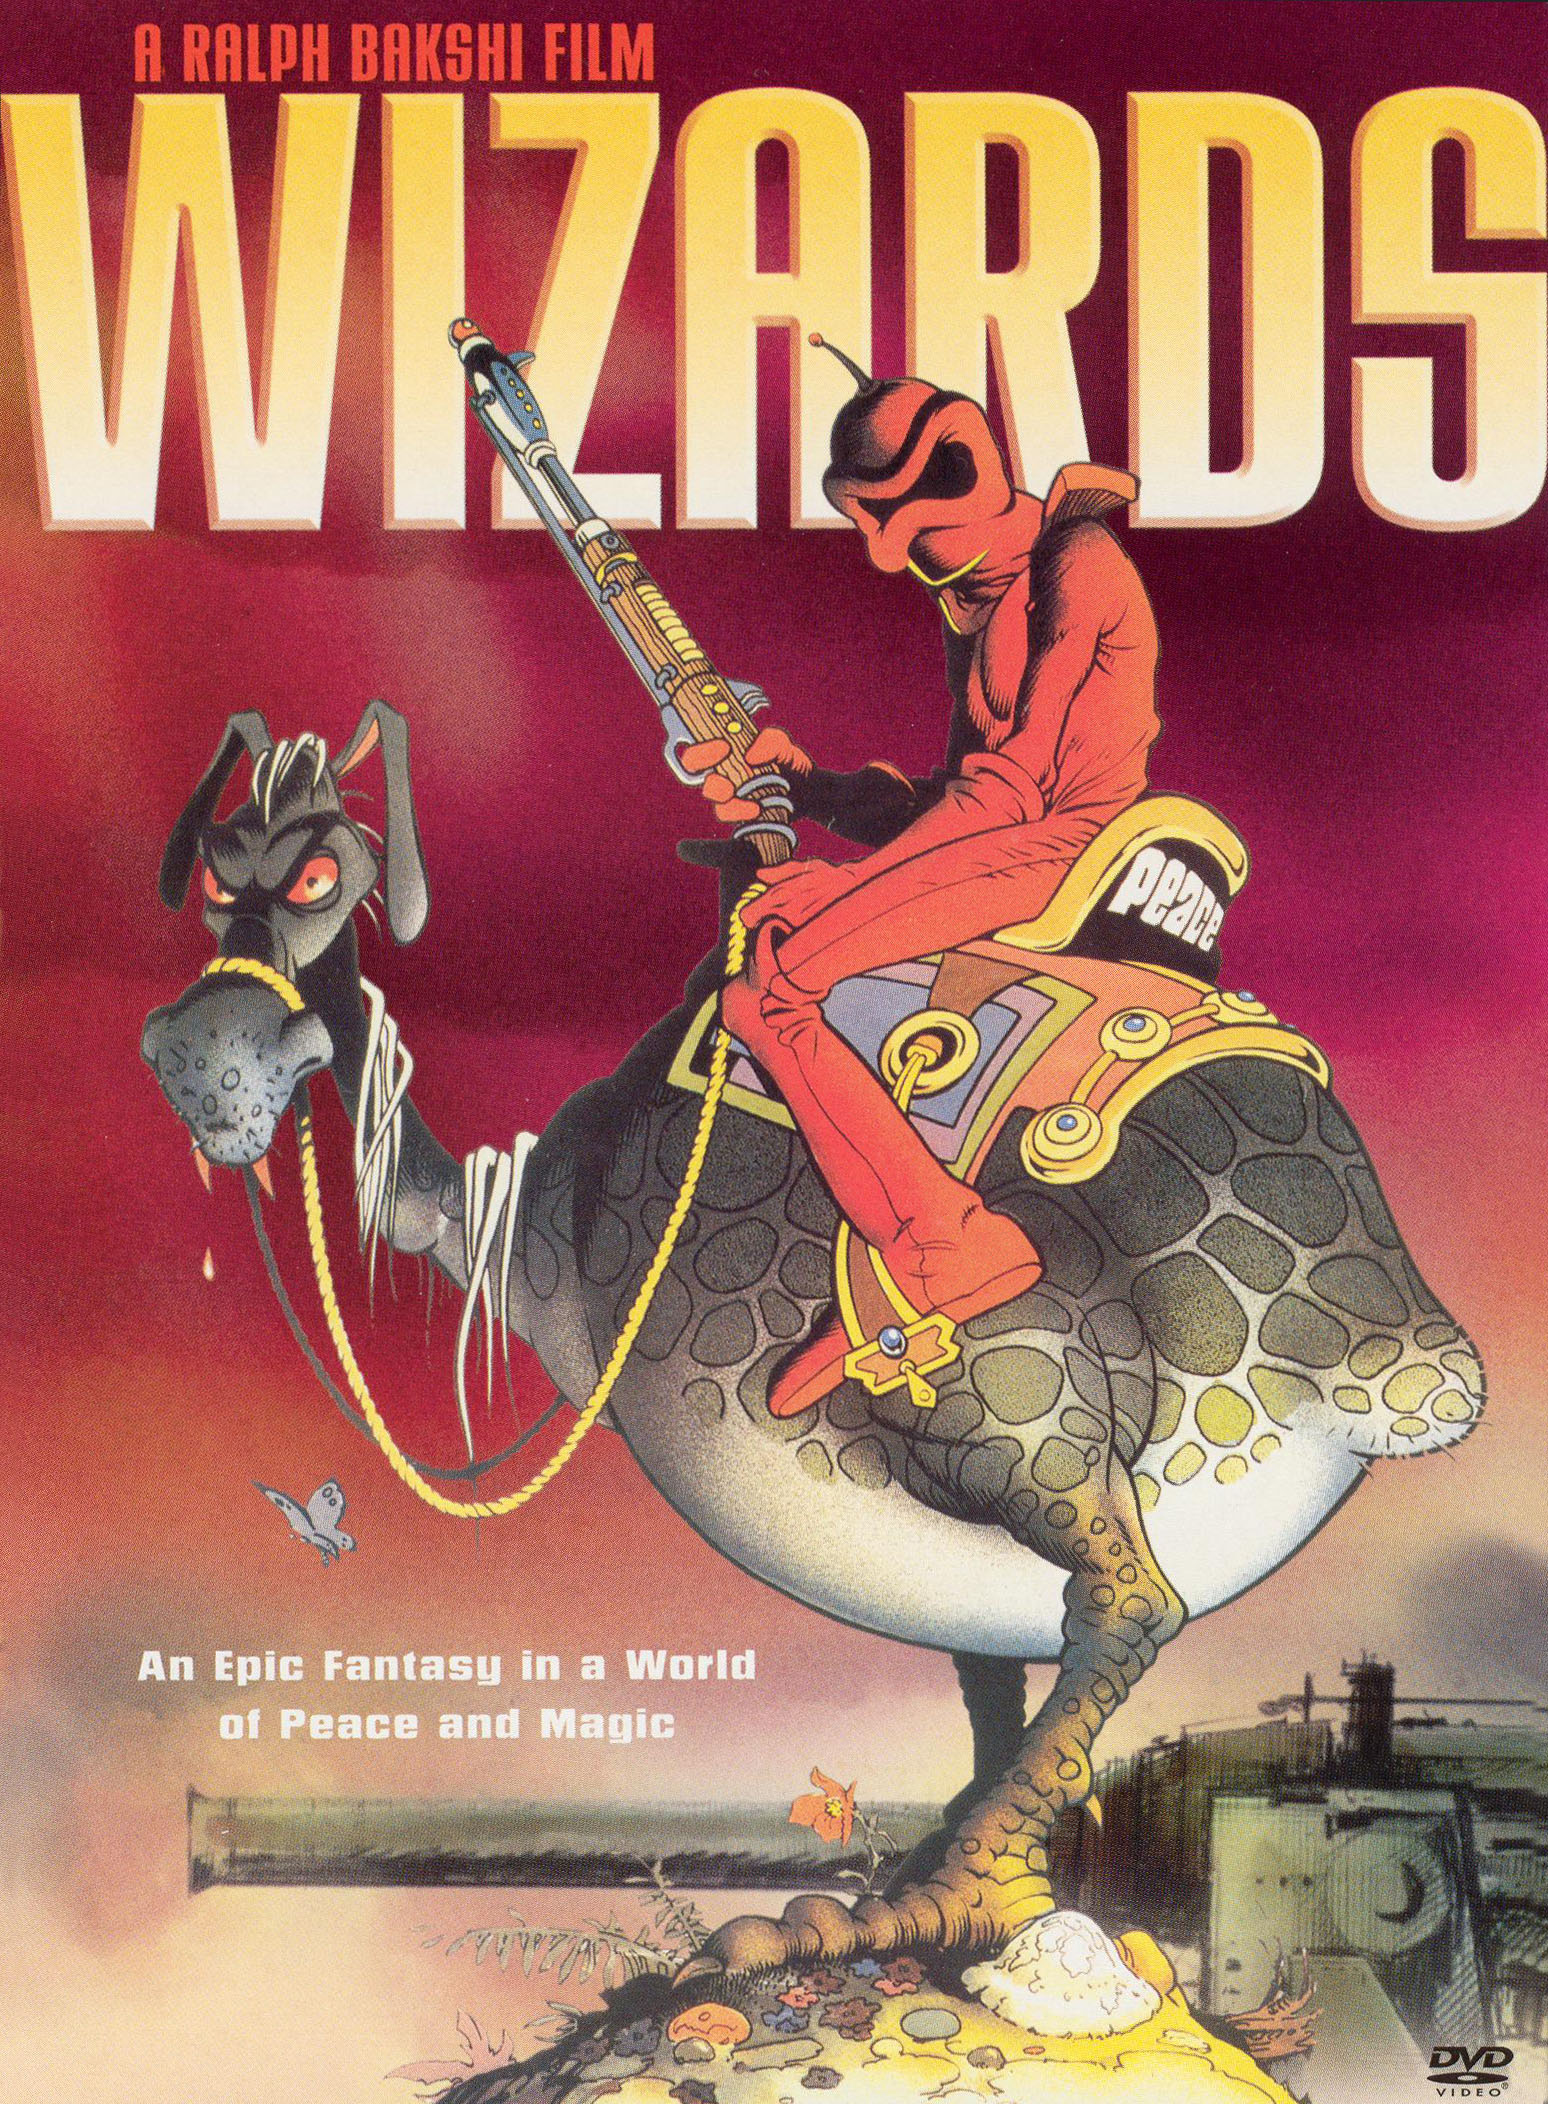 Wizards (1977) Main Poster